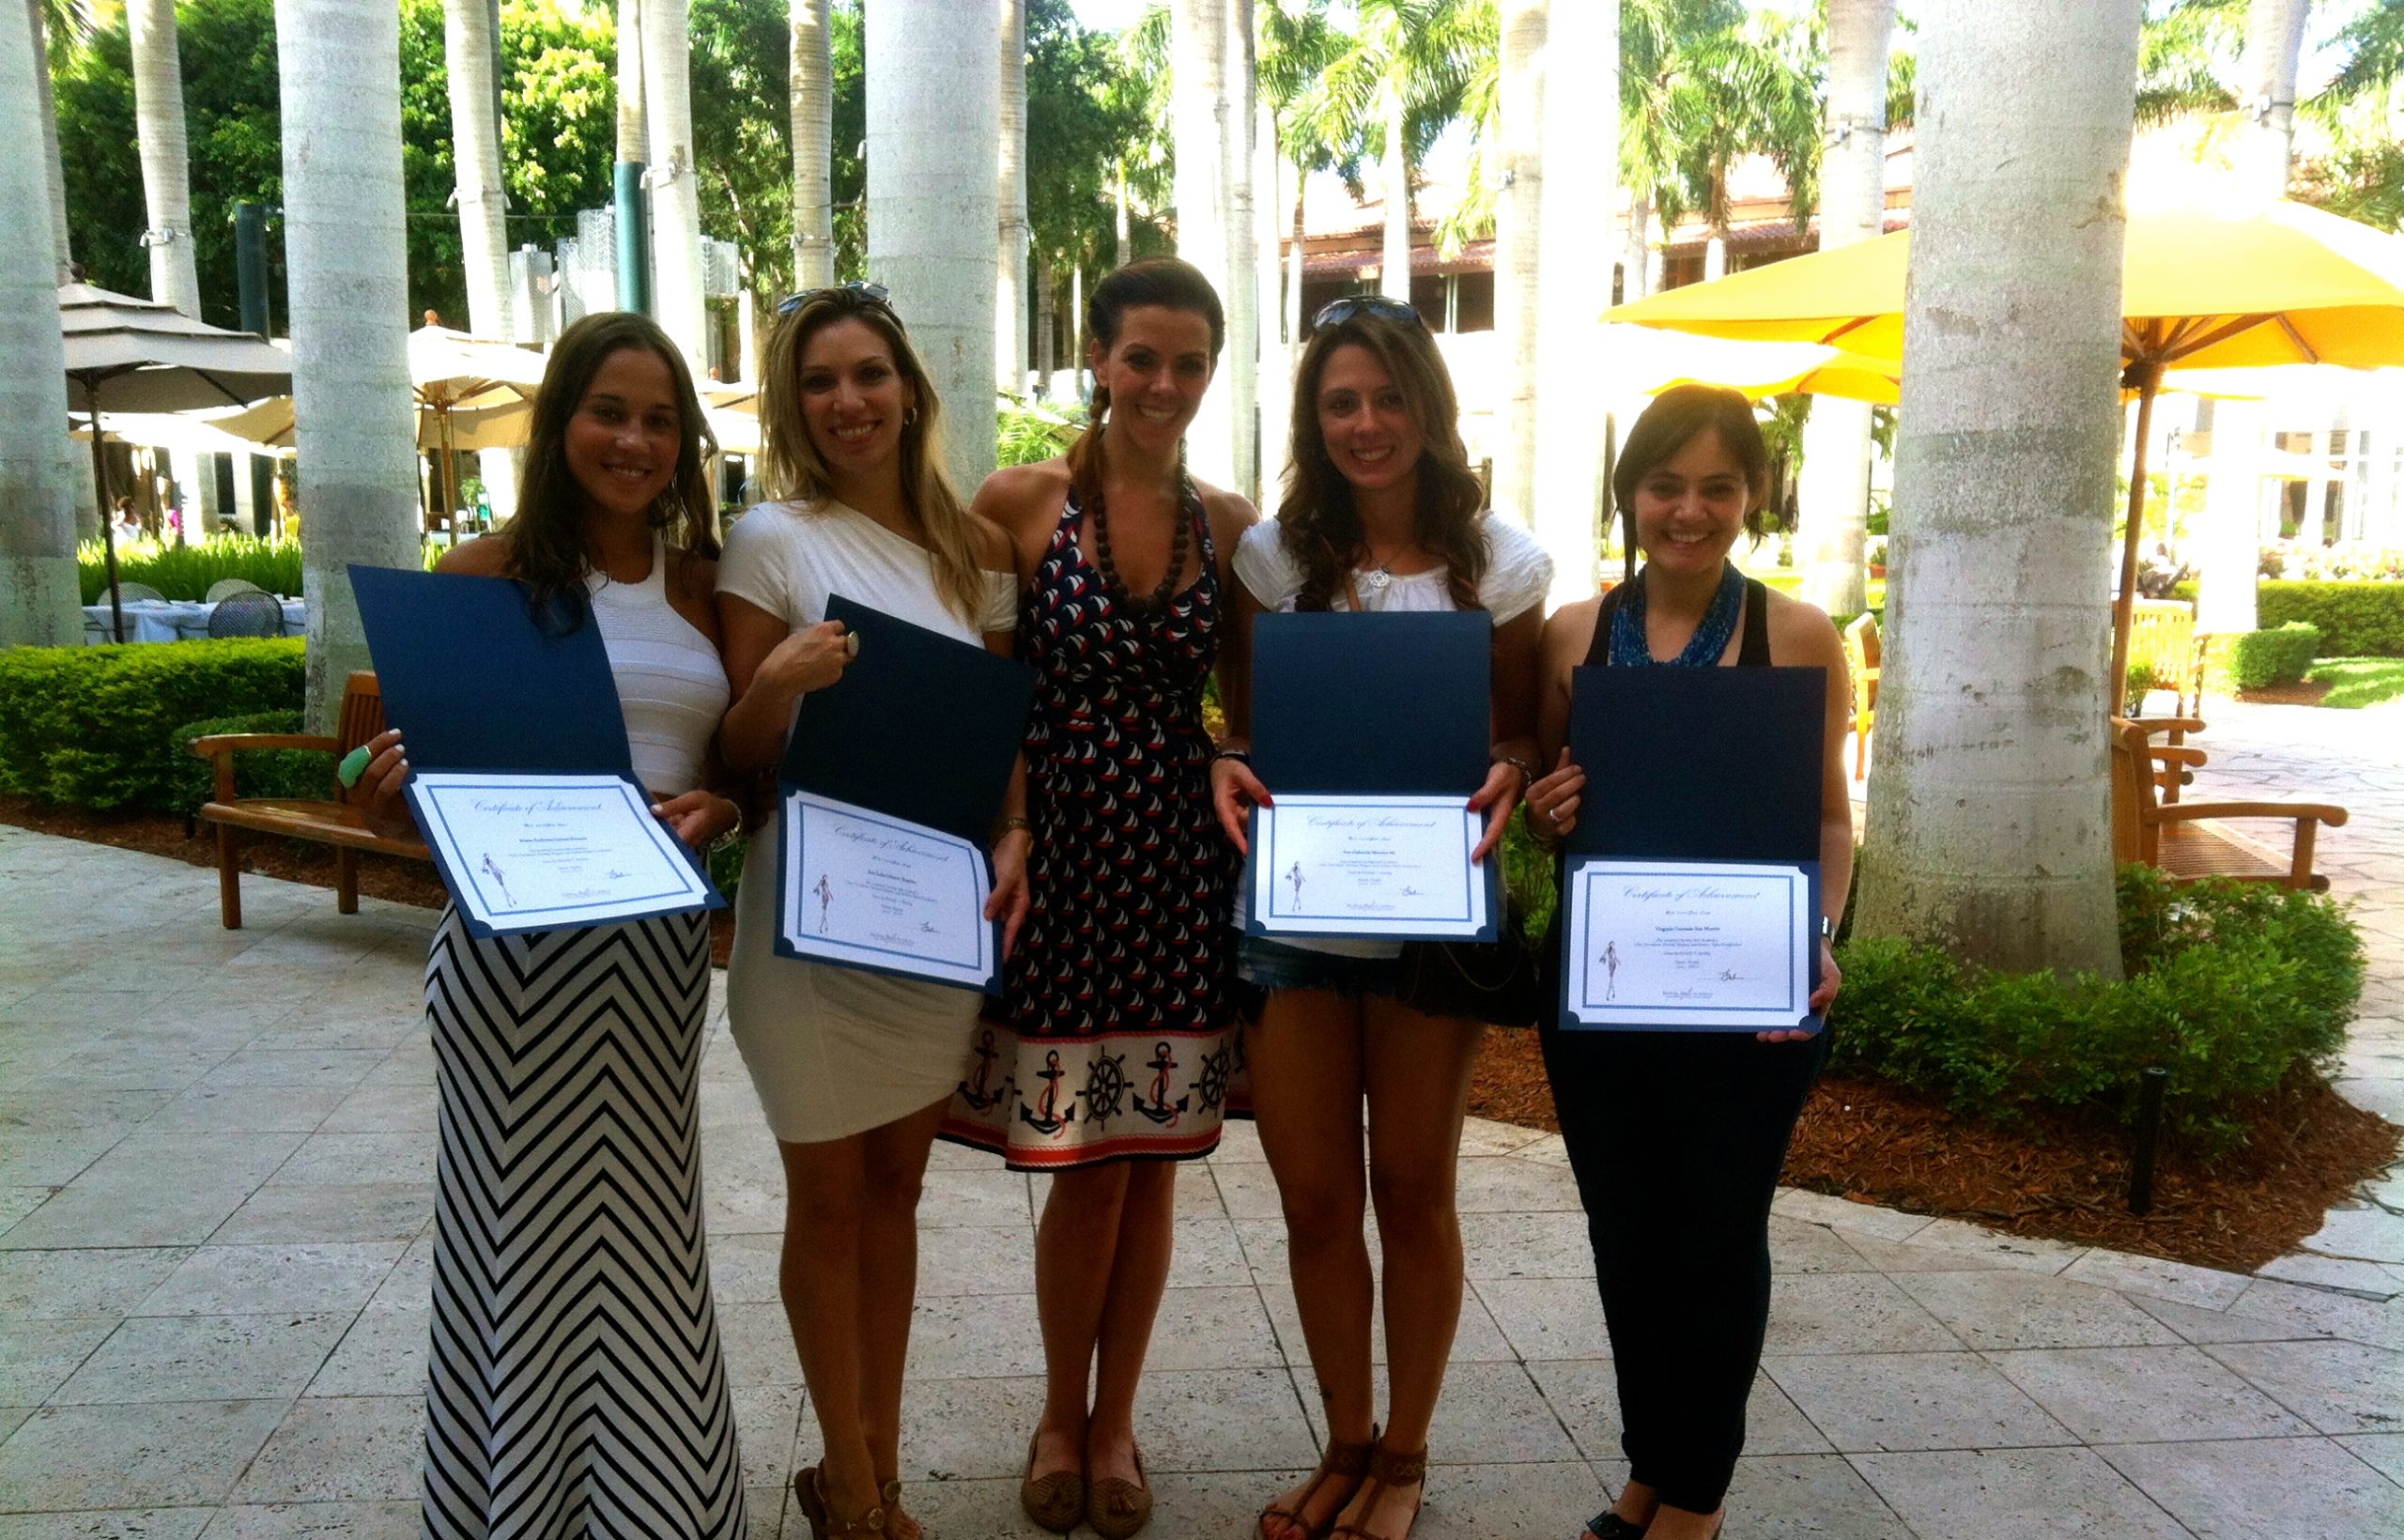 Miami Personal Stylist and Personal Shopper Training Certification at the Sterling Style Academy | Registration closes on December 29, 2014 for February 2015